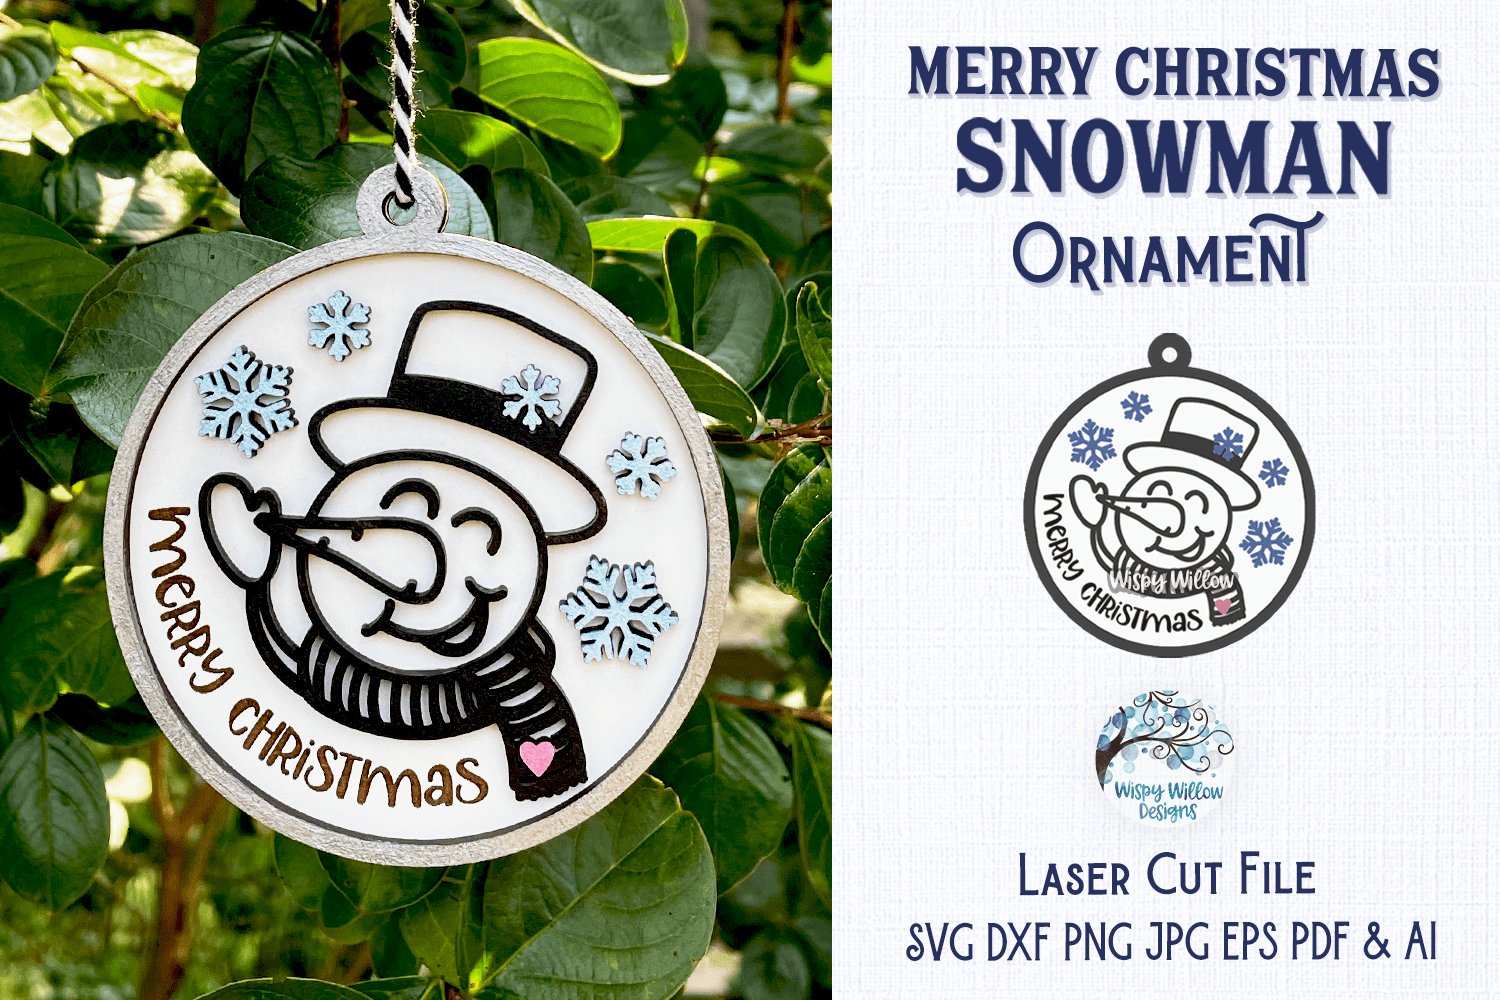 Snowman Christmas Ornament for Glowforge or Laser Cutter Wispy Willow Designs Company